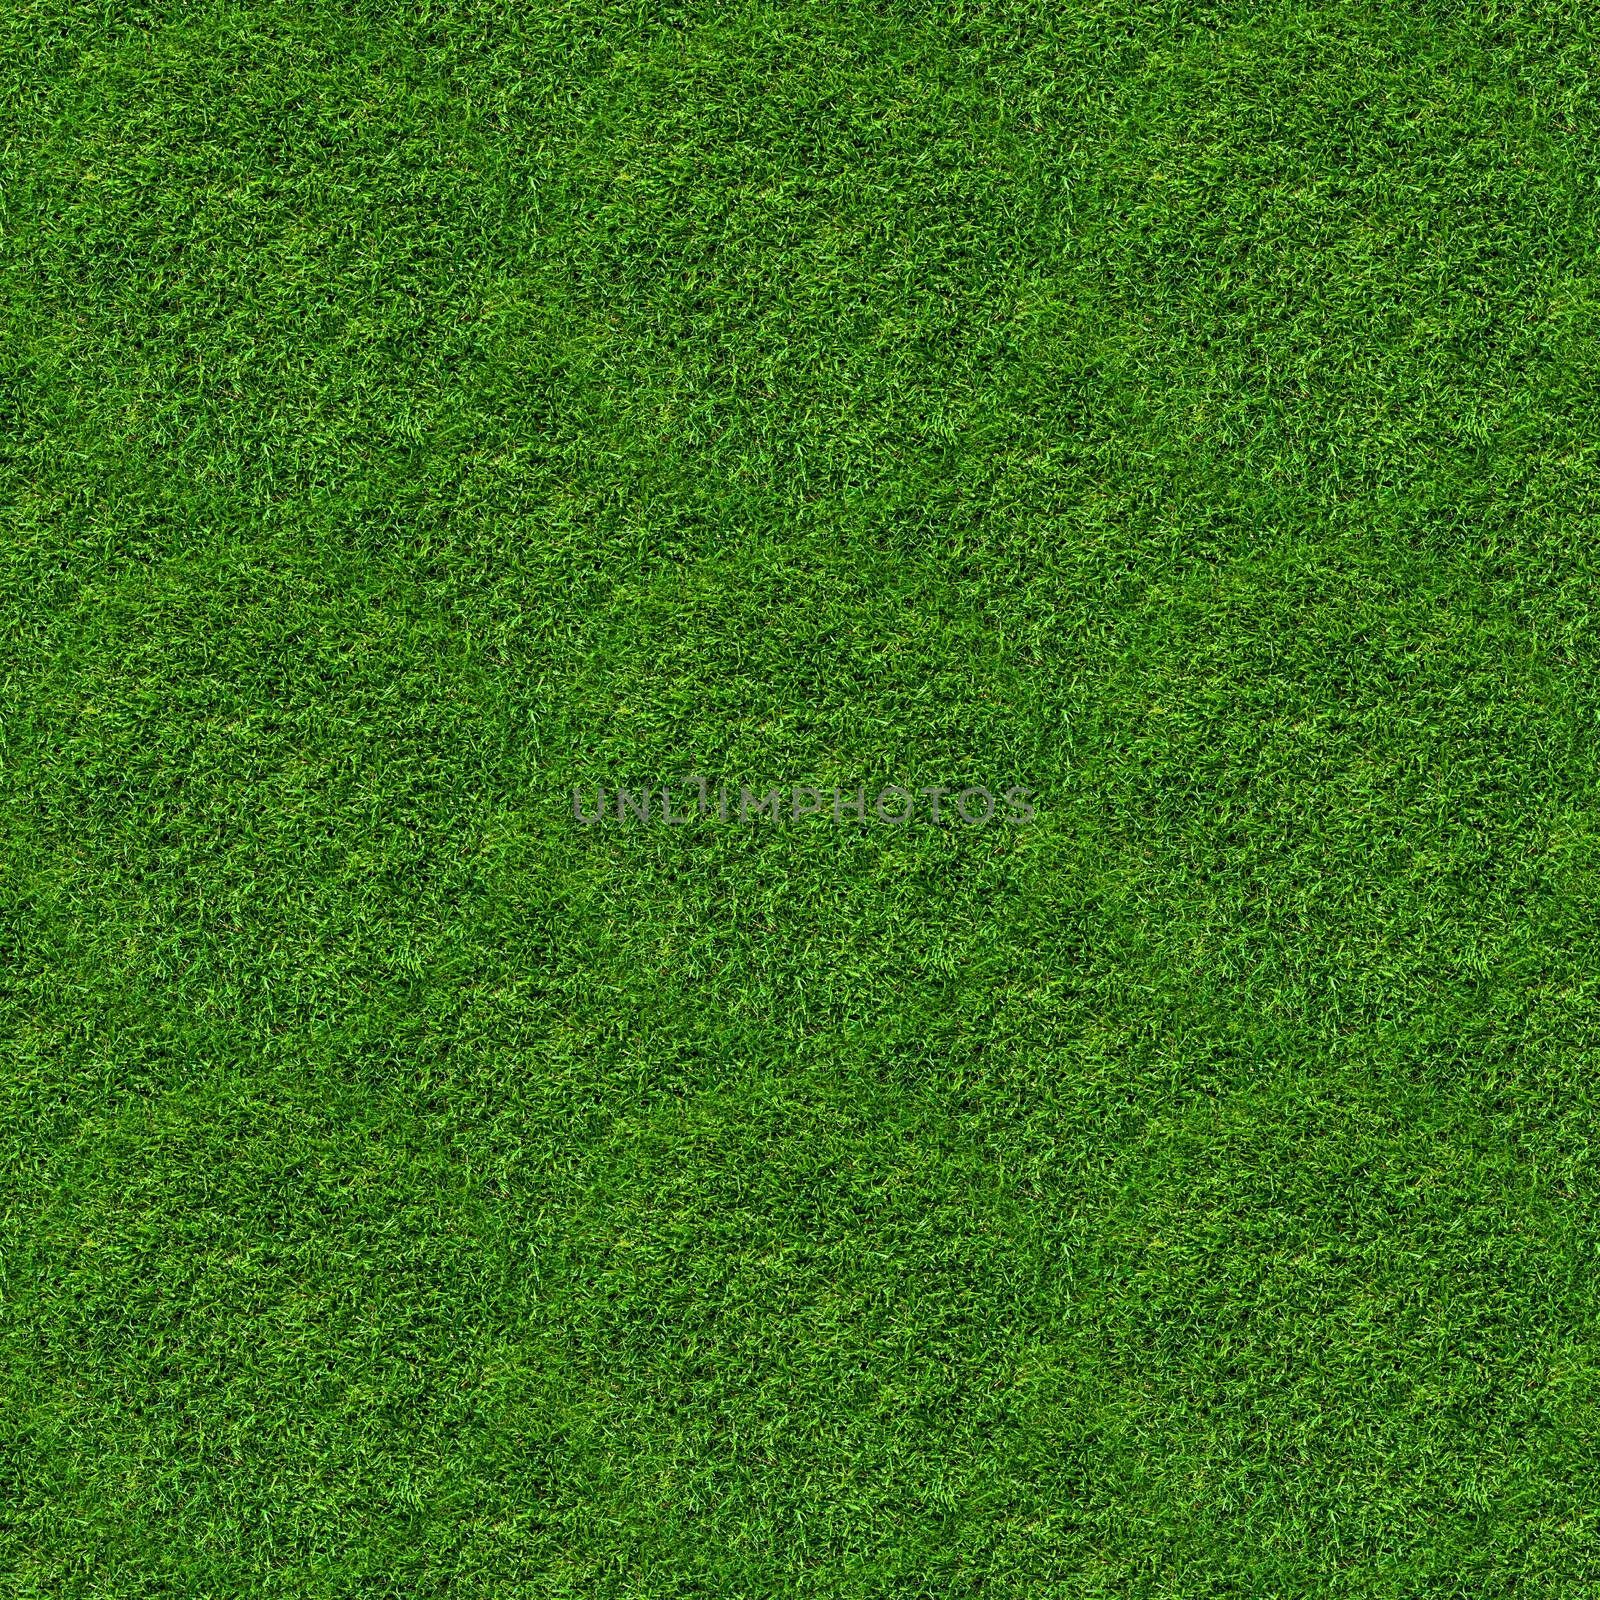 green landscaped lawn as background or wallpaper. seamless texture by Edophoto